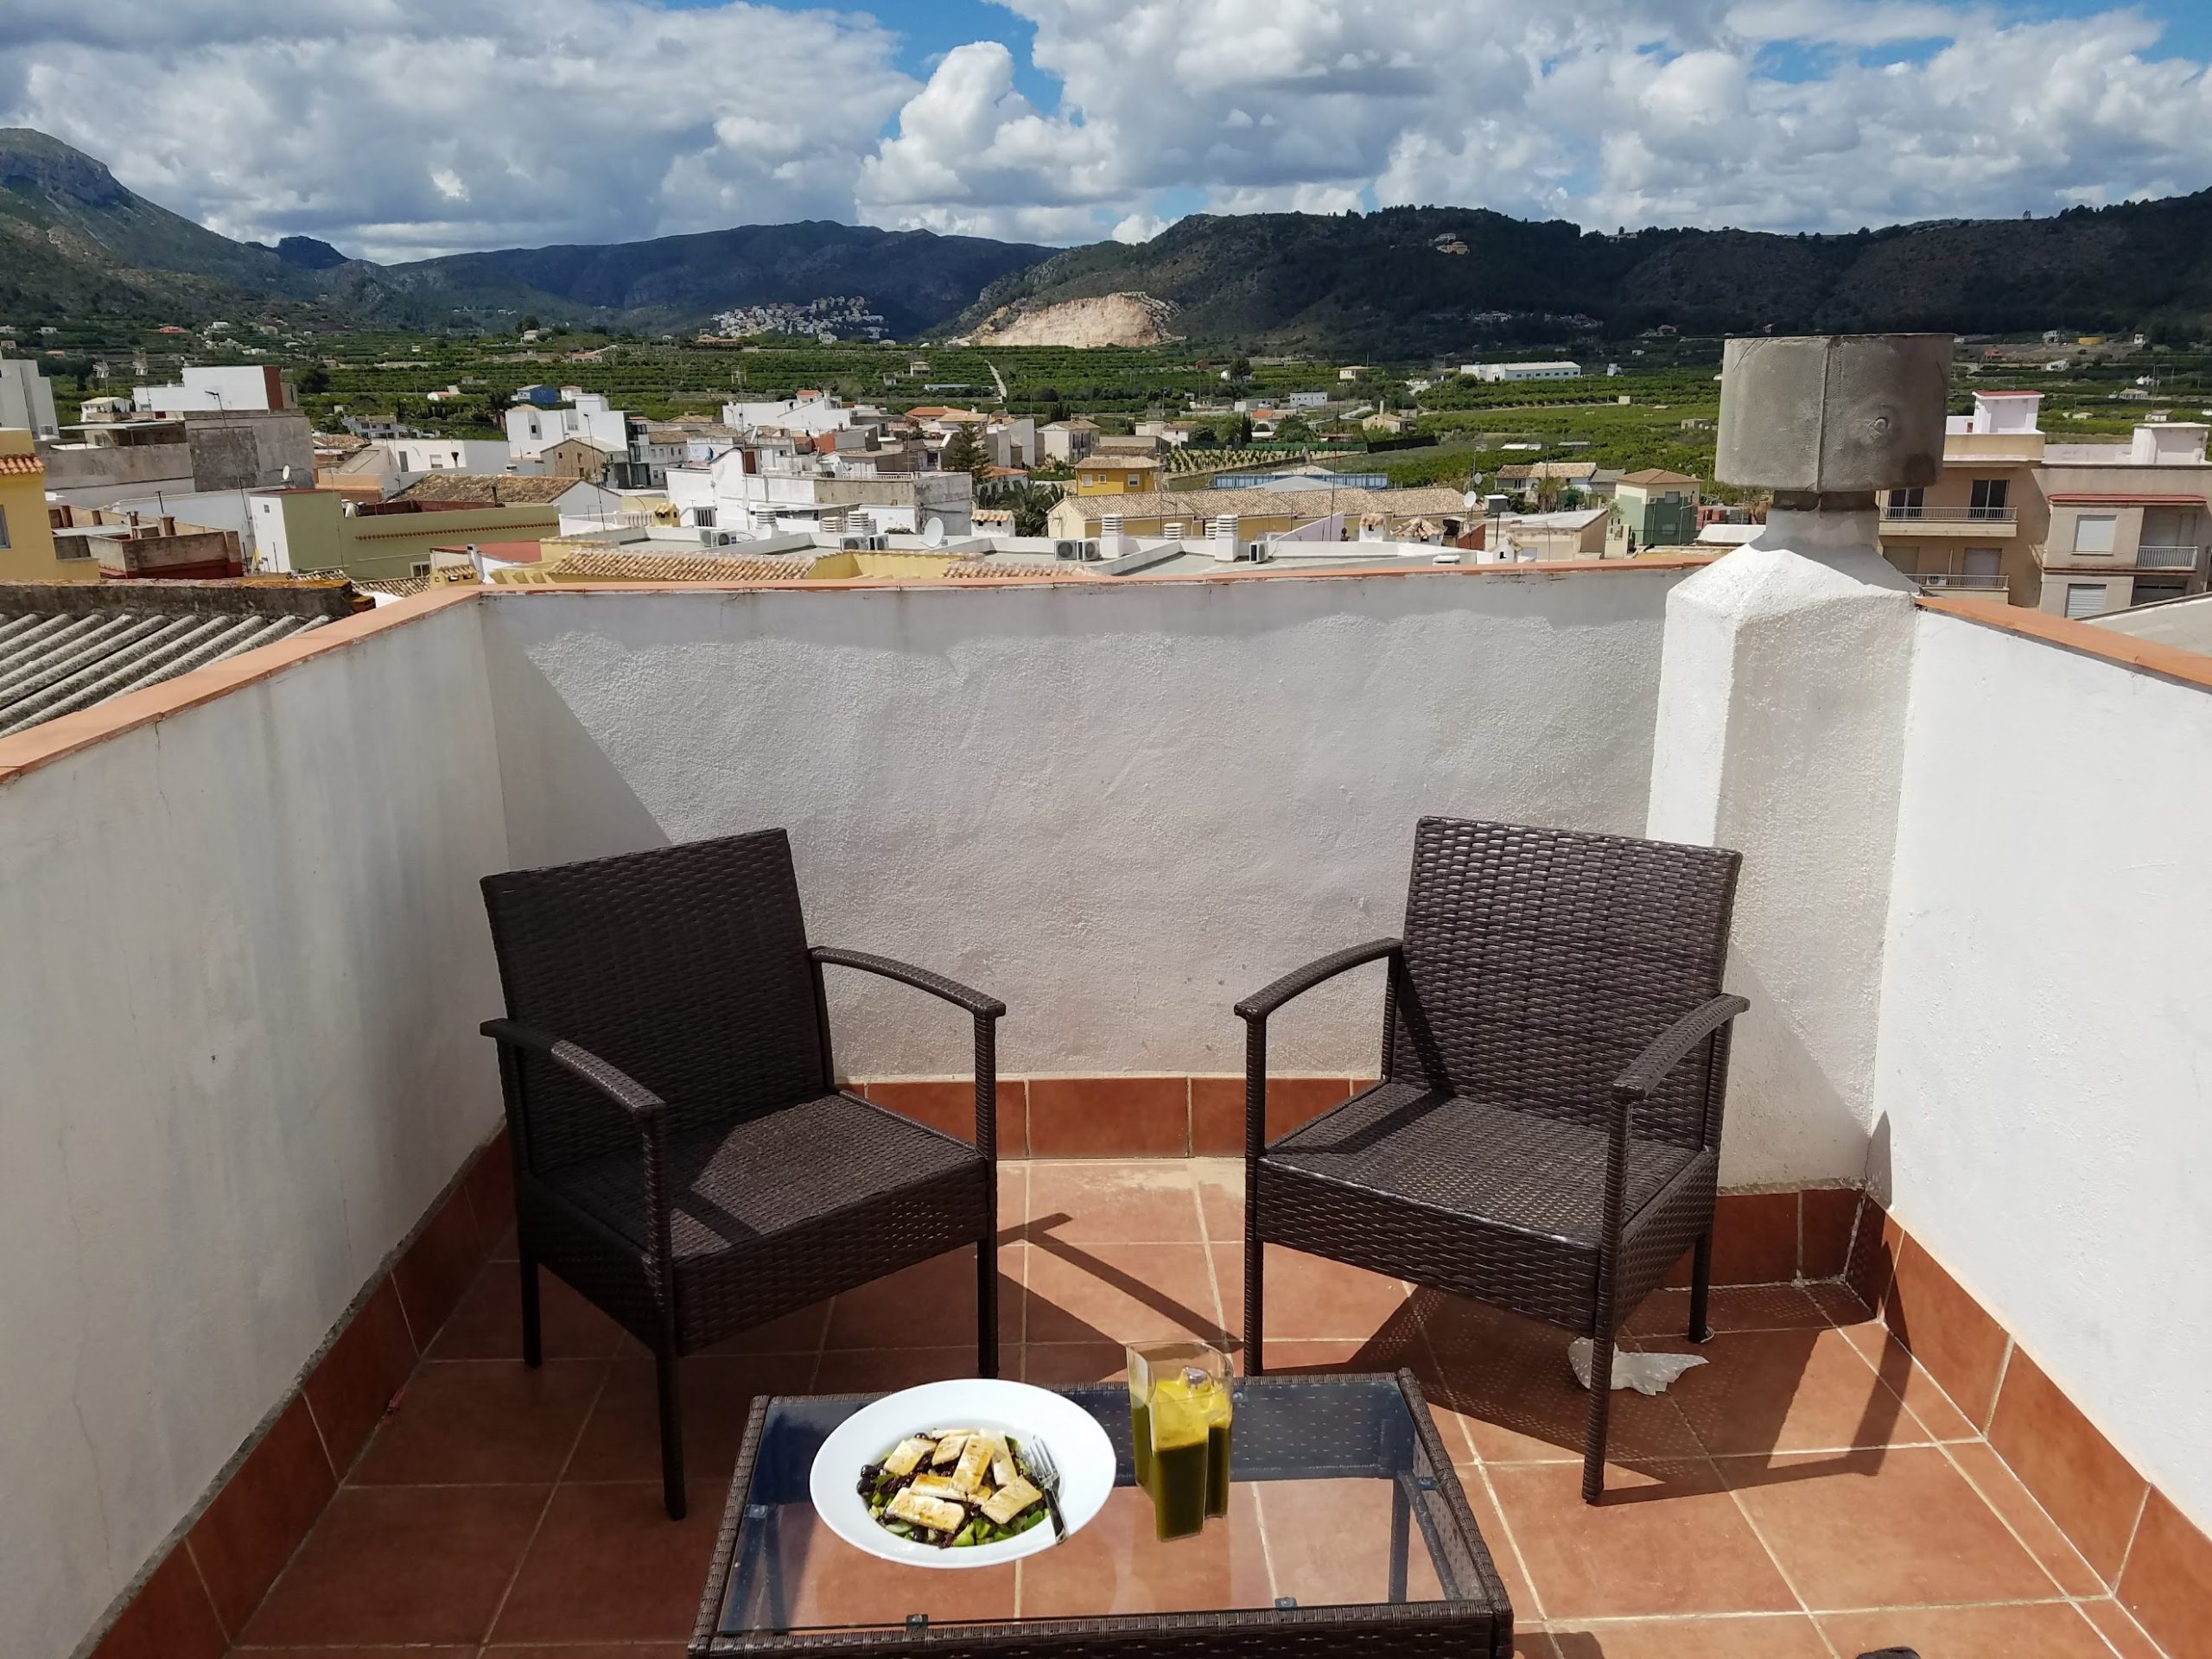 How I Found My First Cheap House in Spain